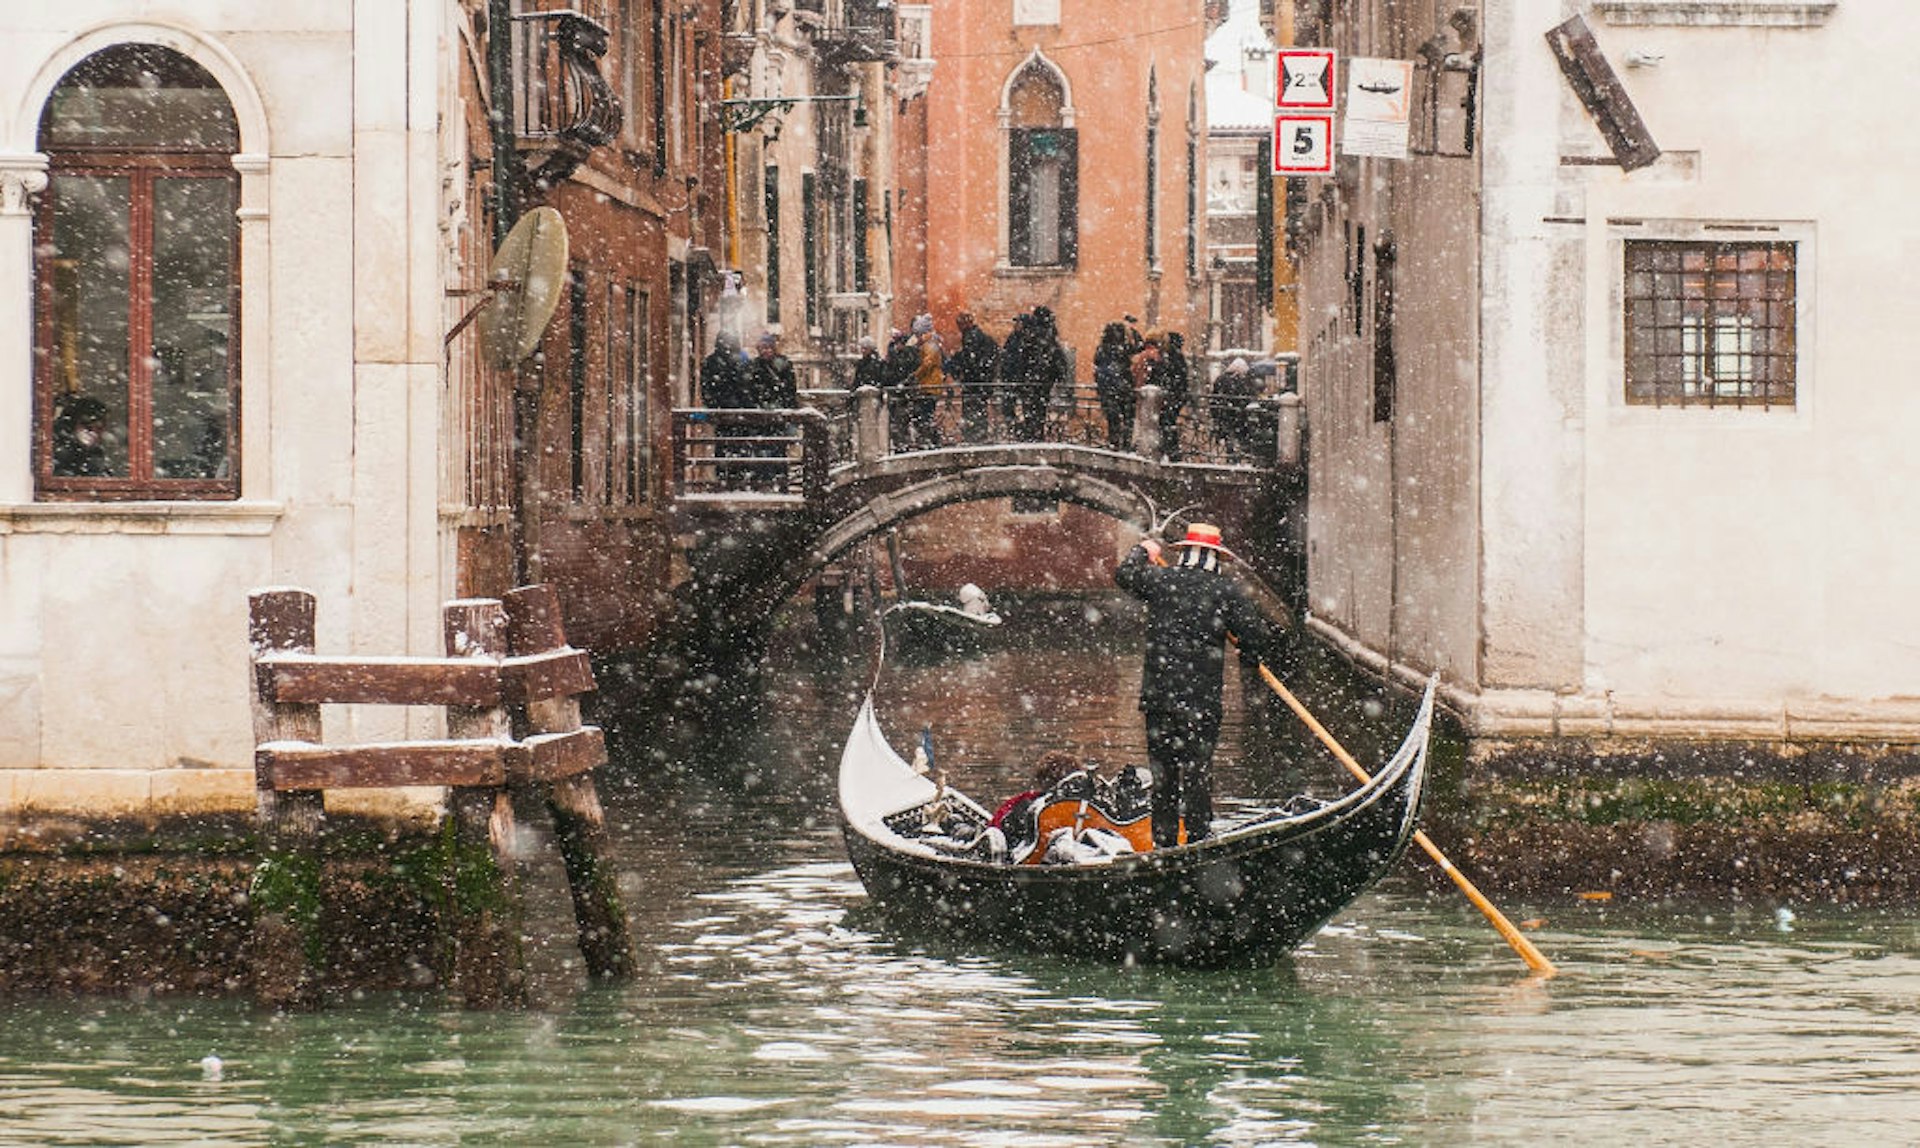 A gondola enters a canal during snowfall in Venice, Italy